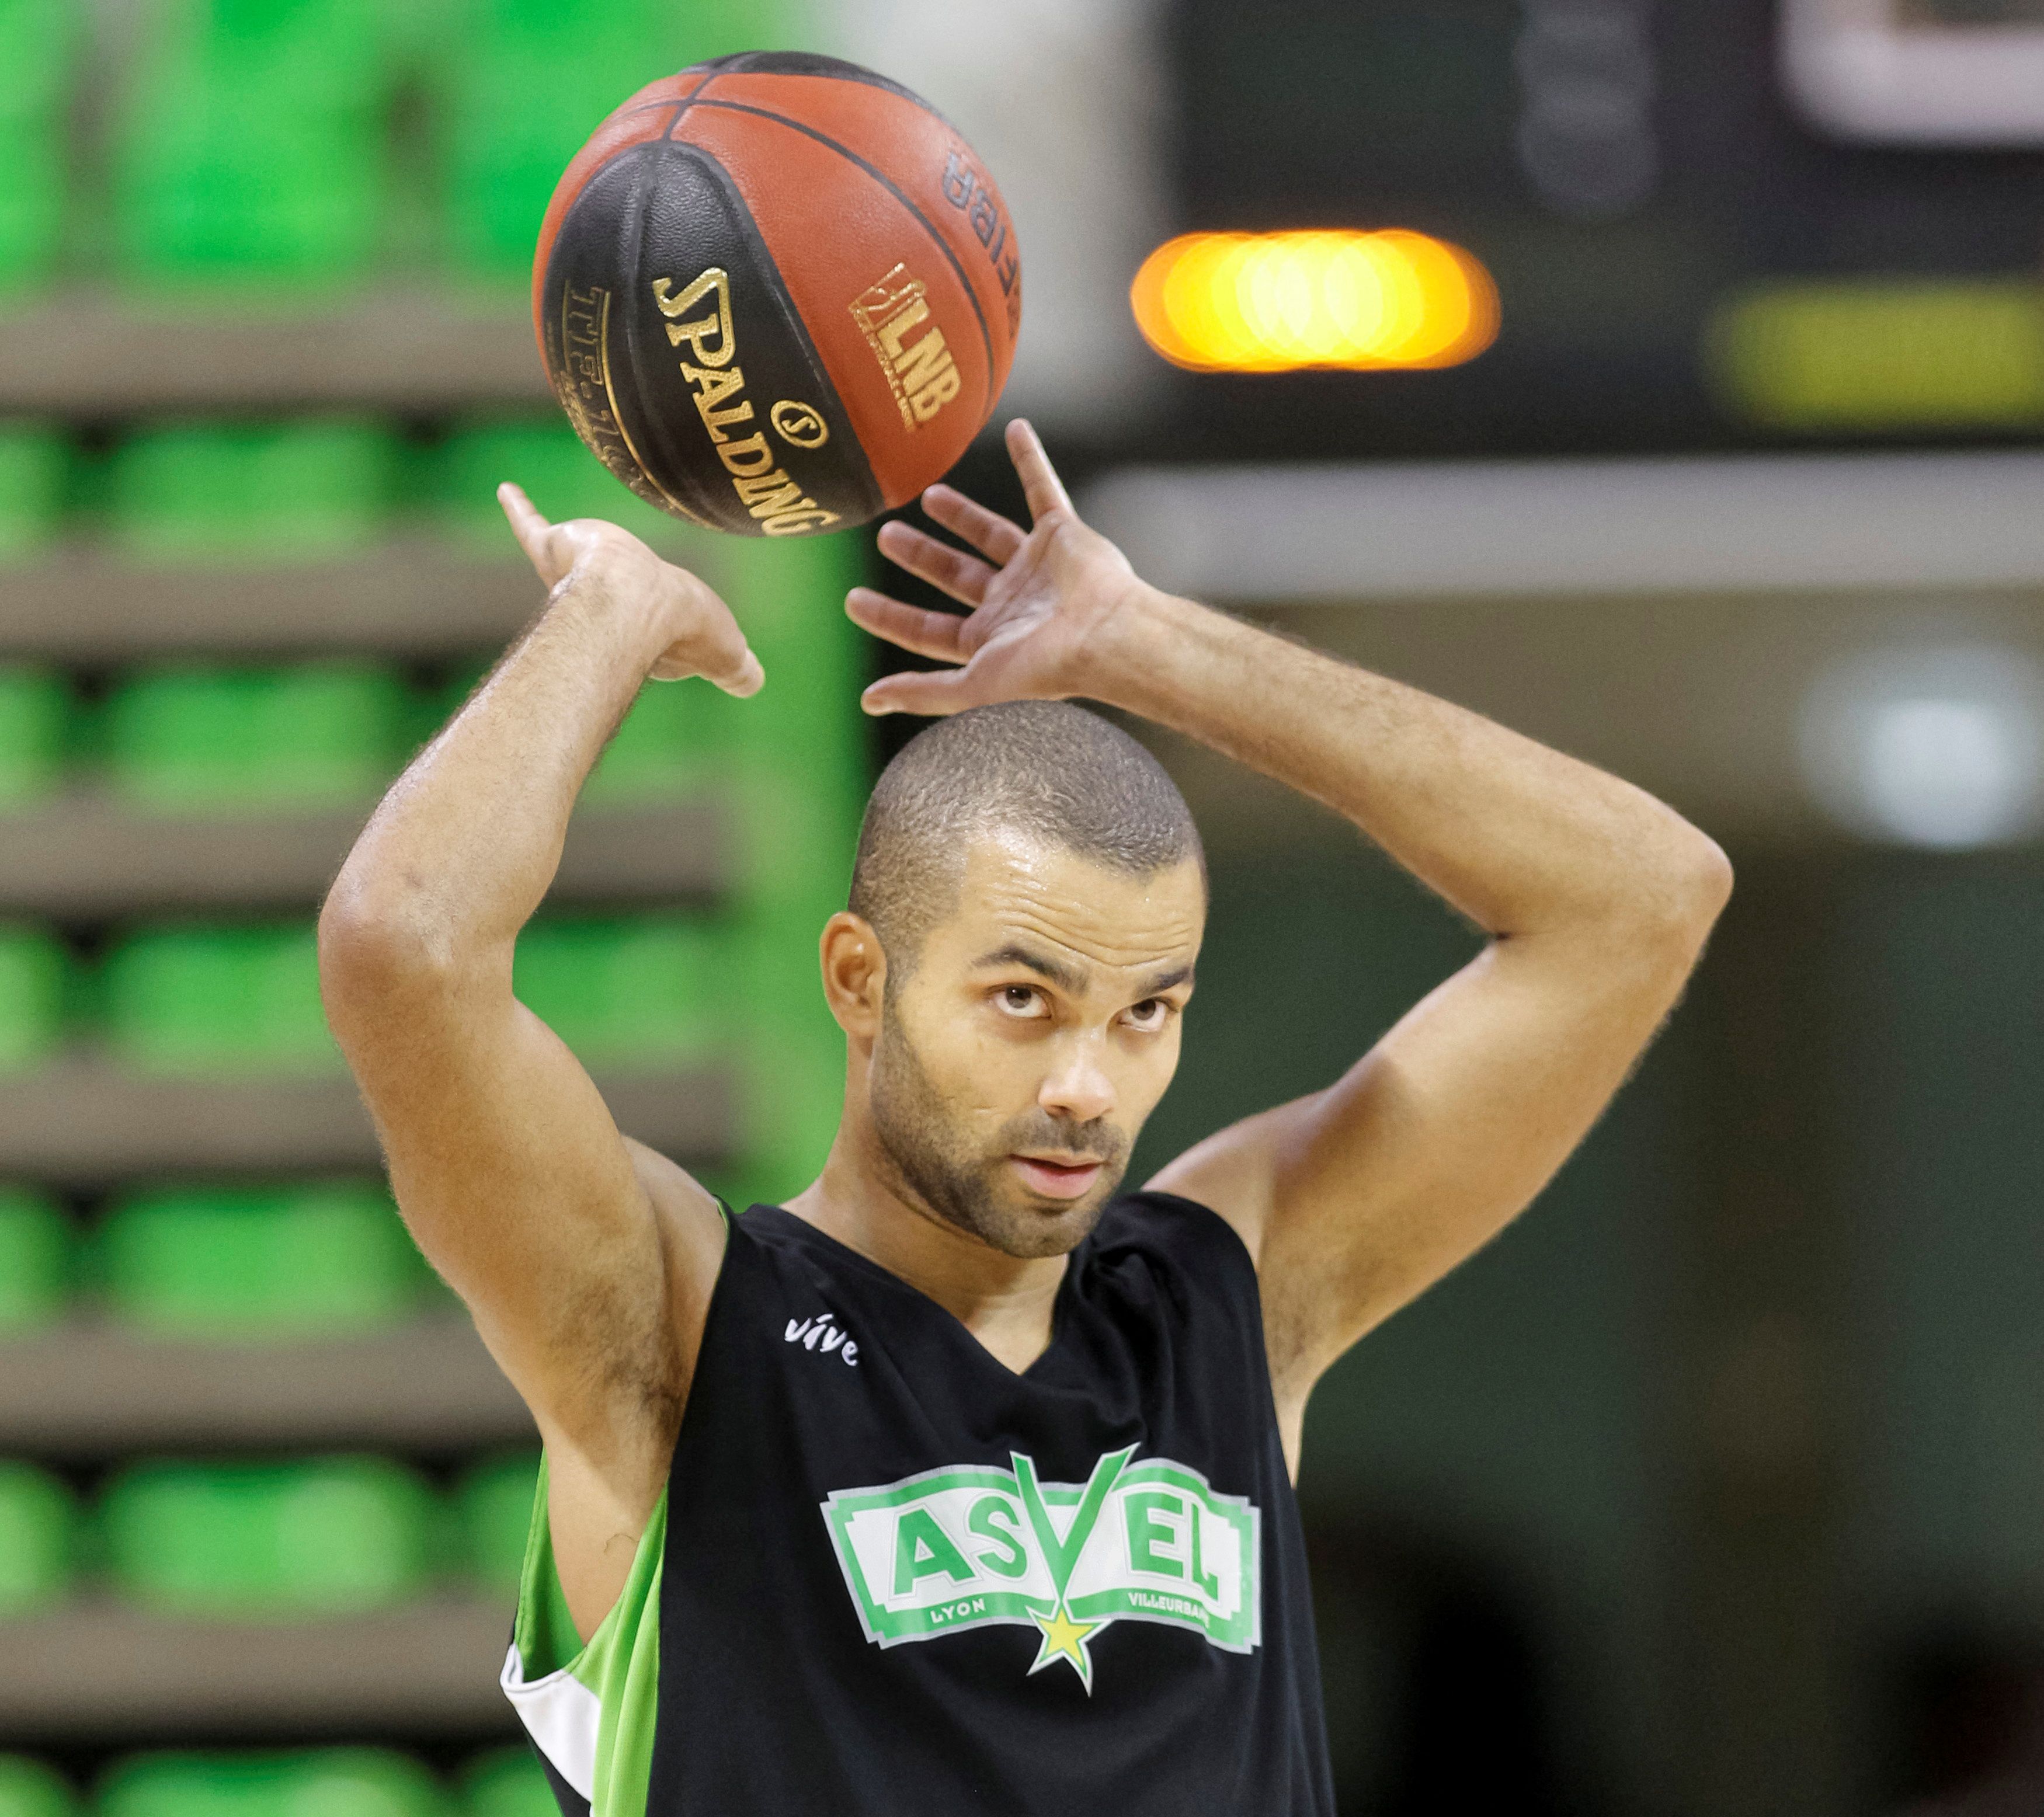 Tony Parker, NBA basketball player with the San Antonio Spurs, attends a training session with his French club ASVEL in Villeurbanne